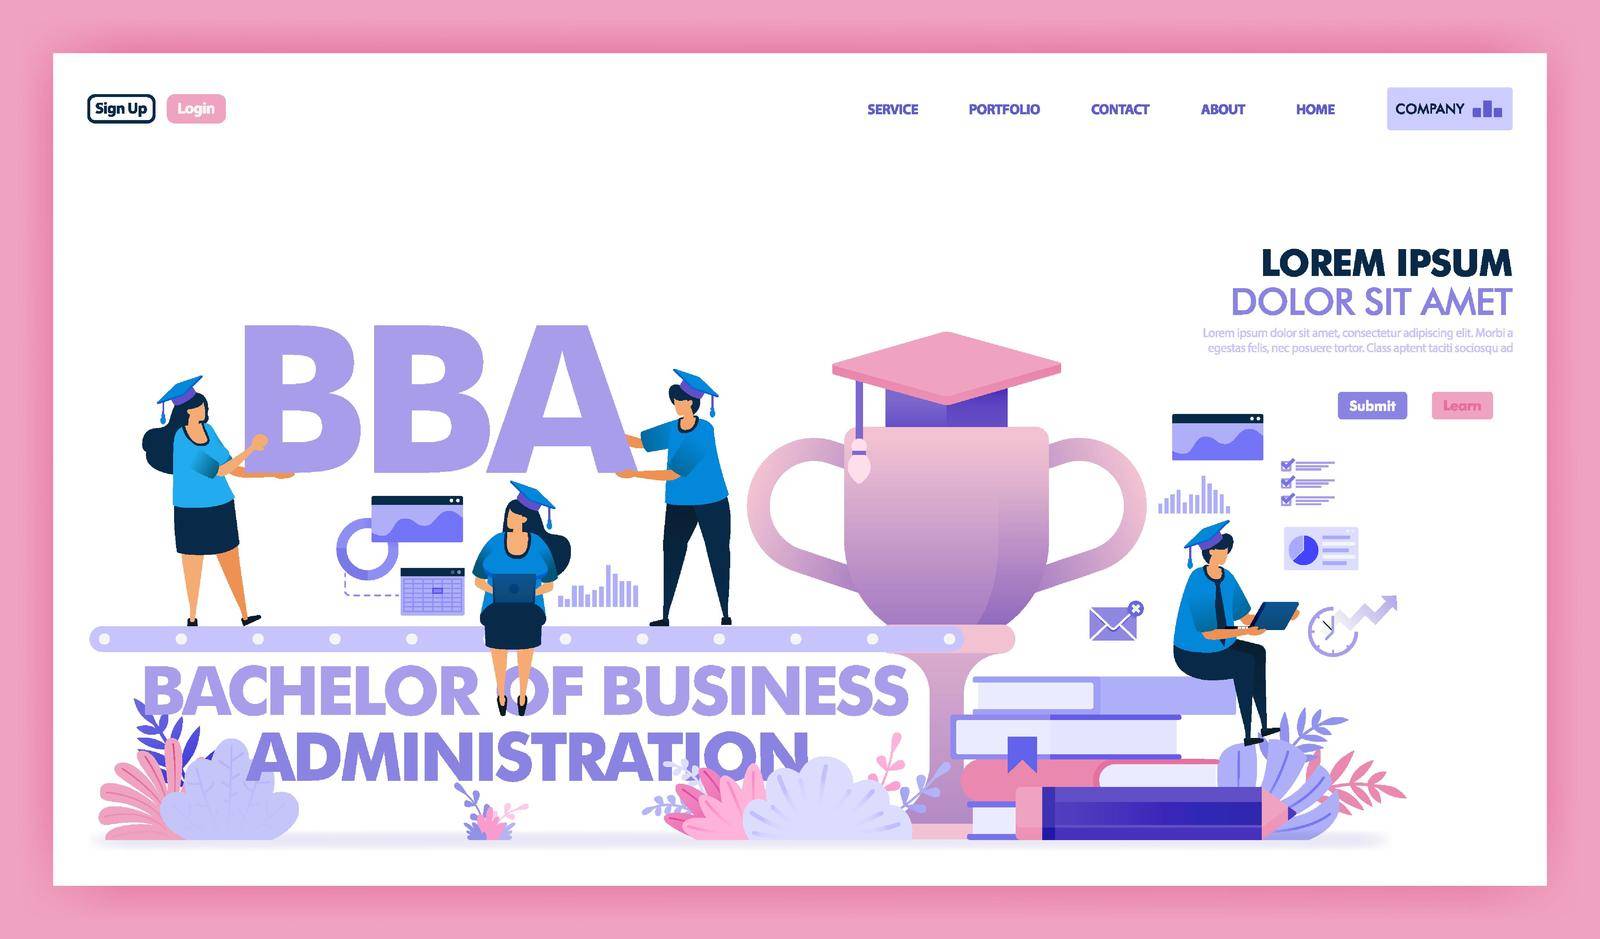 BBA or bachelor of business administration is a university program for business and economics, people learn to get a degree master of business administration or MBA. Flat illustration vector design.